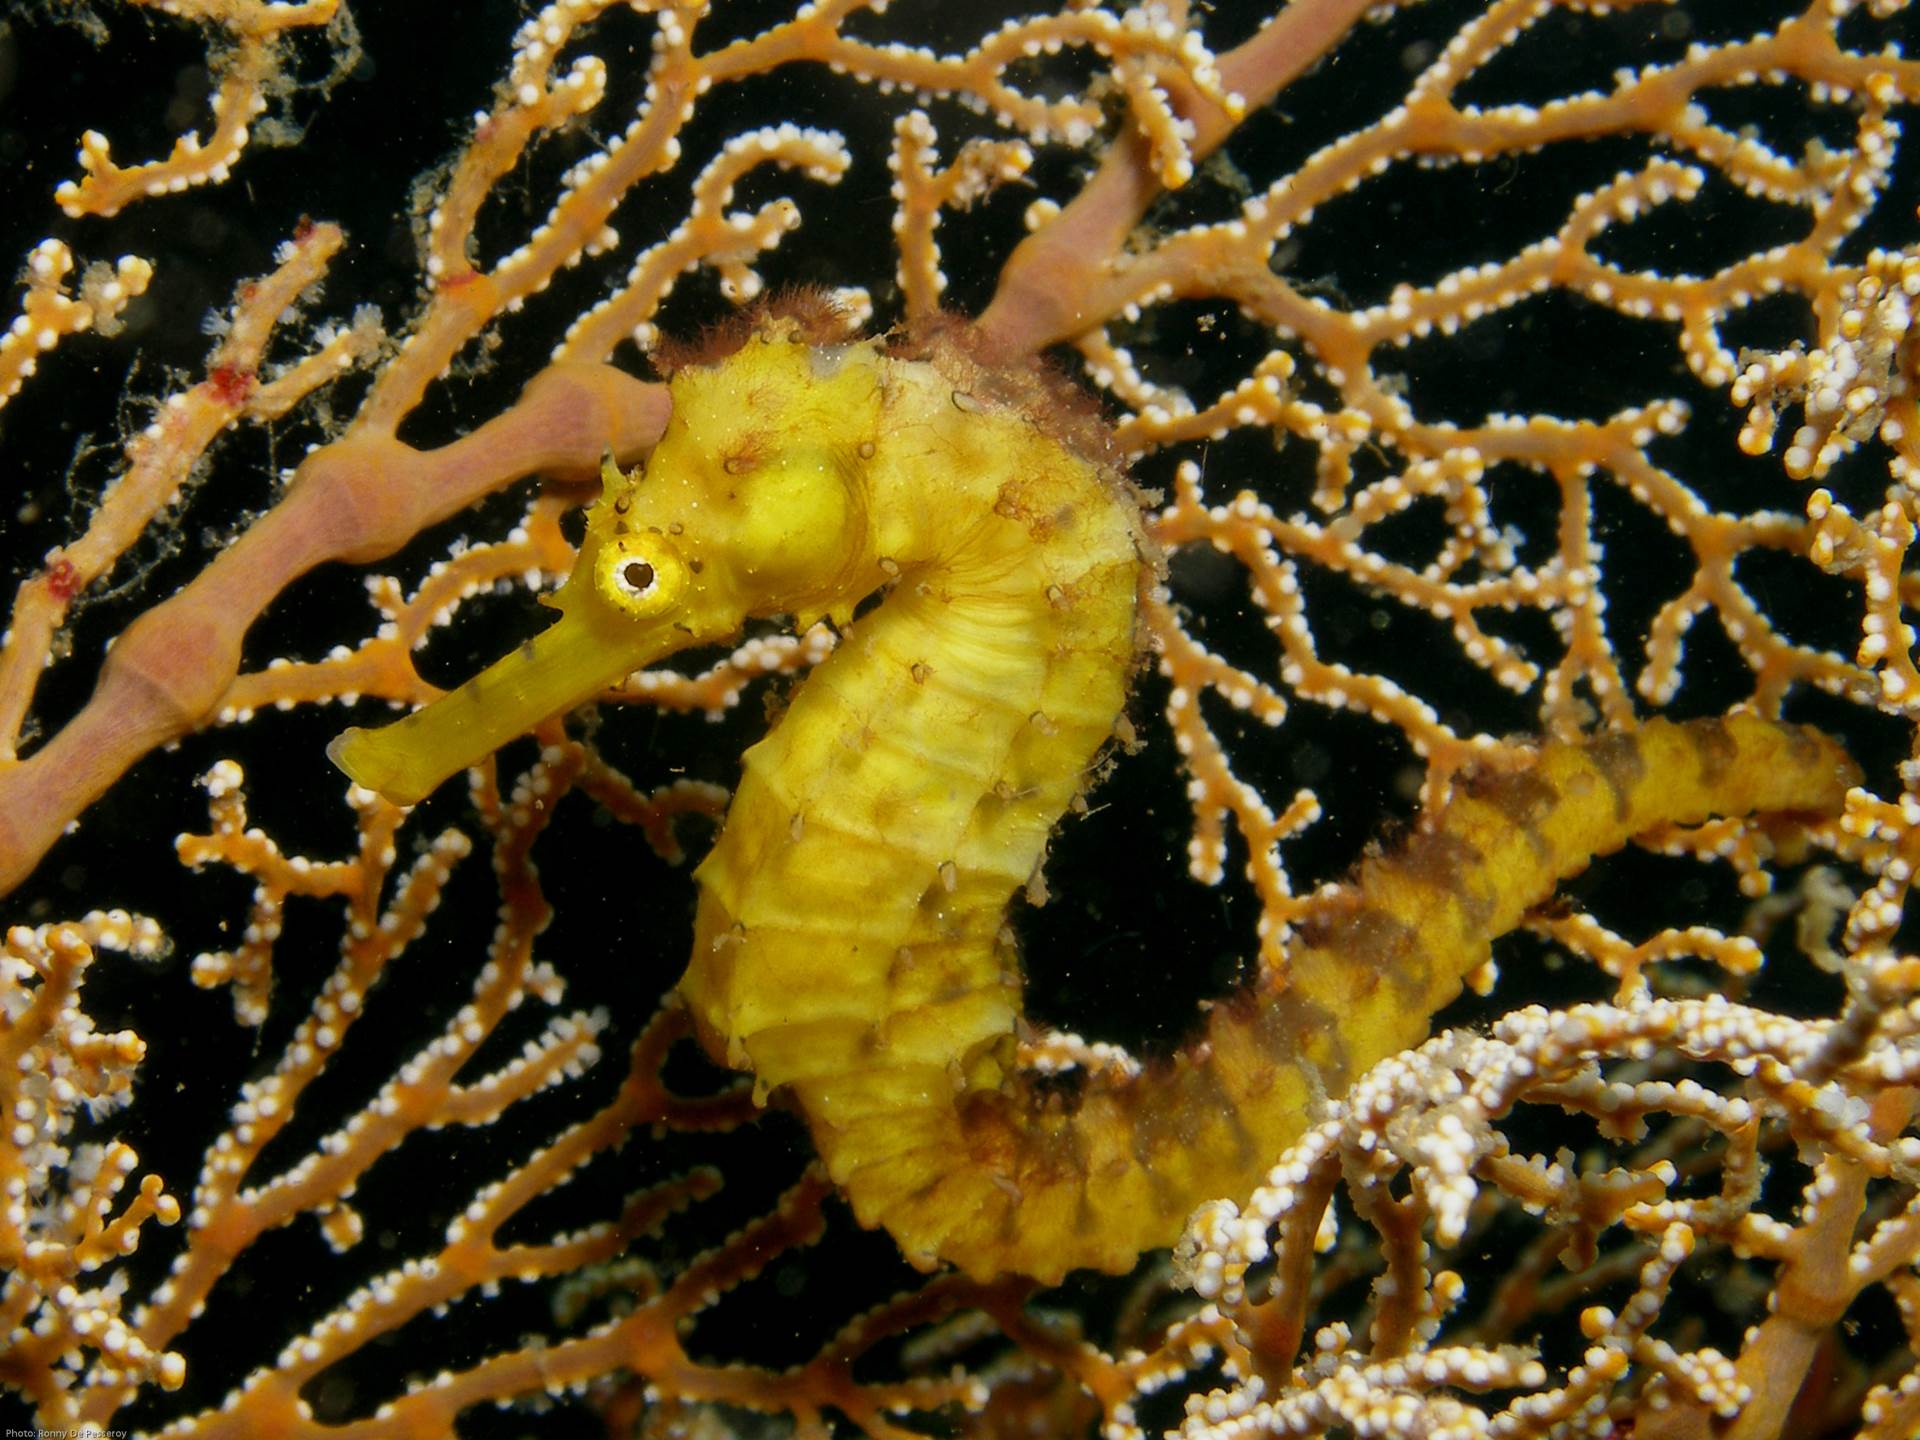 A tiger tail seahorse (H. comes) spotted in Gato Island, Philippines.
Photo by Ronny De Pesseroy/Guylian Seahorses of the World